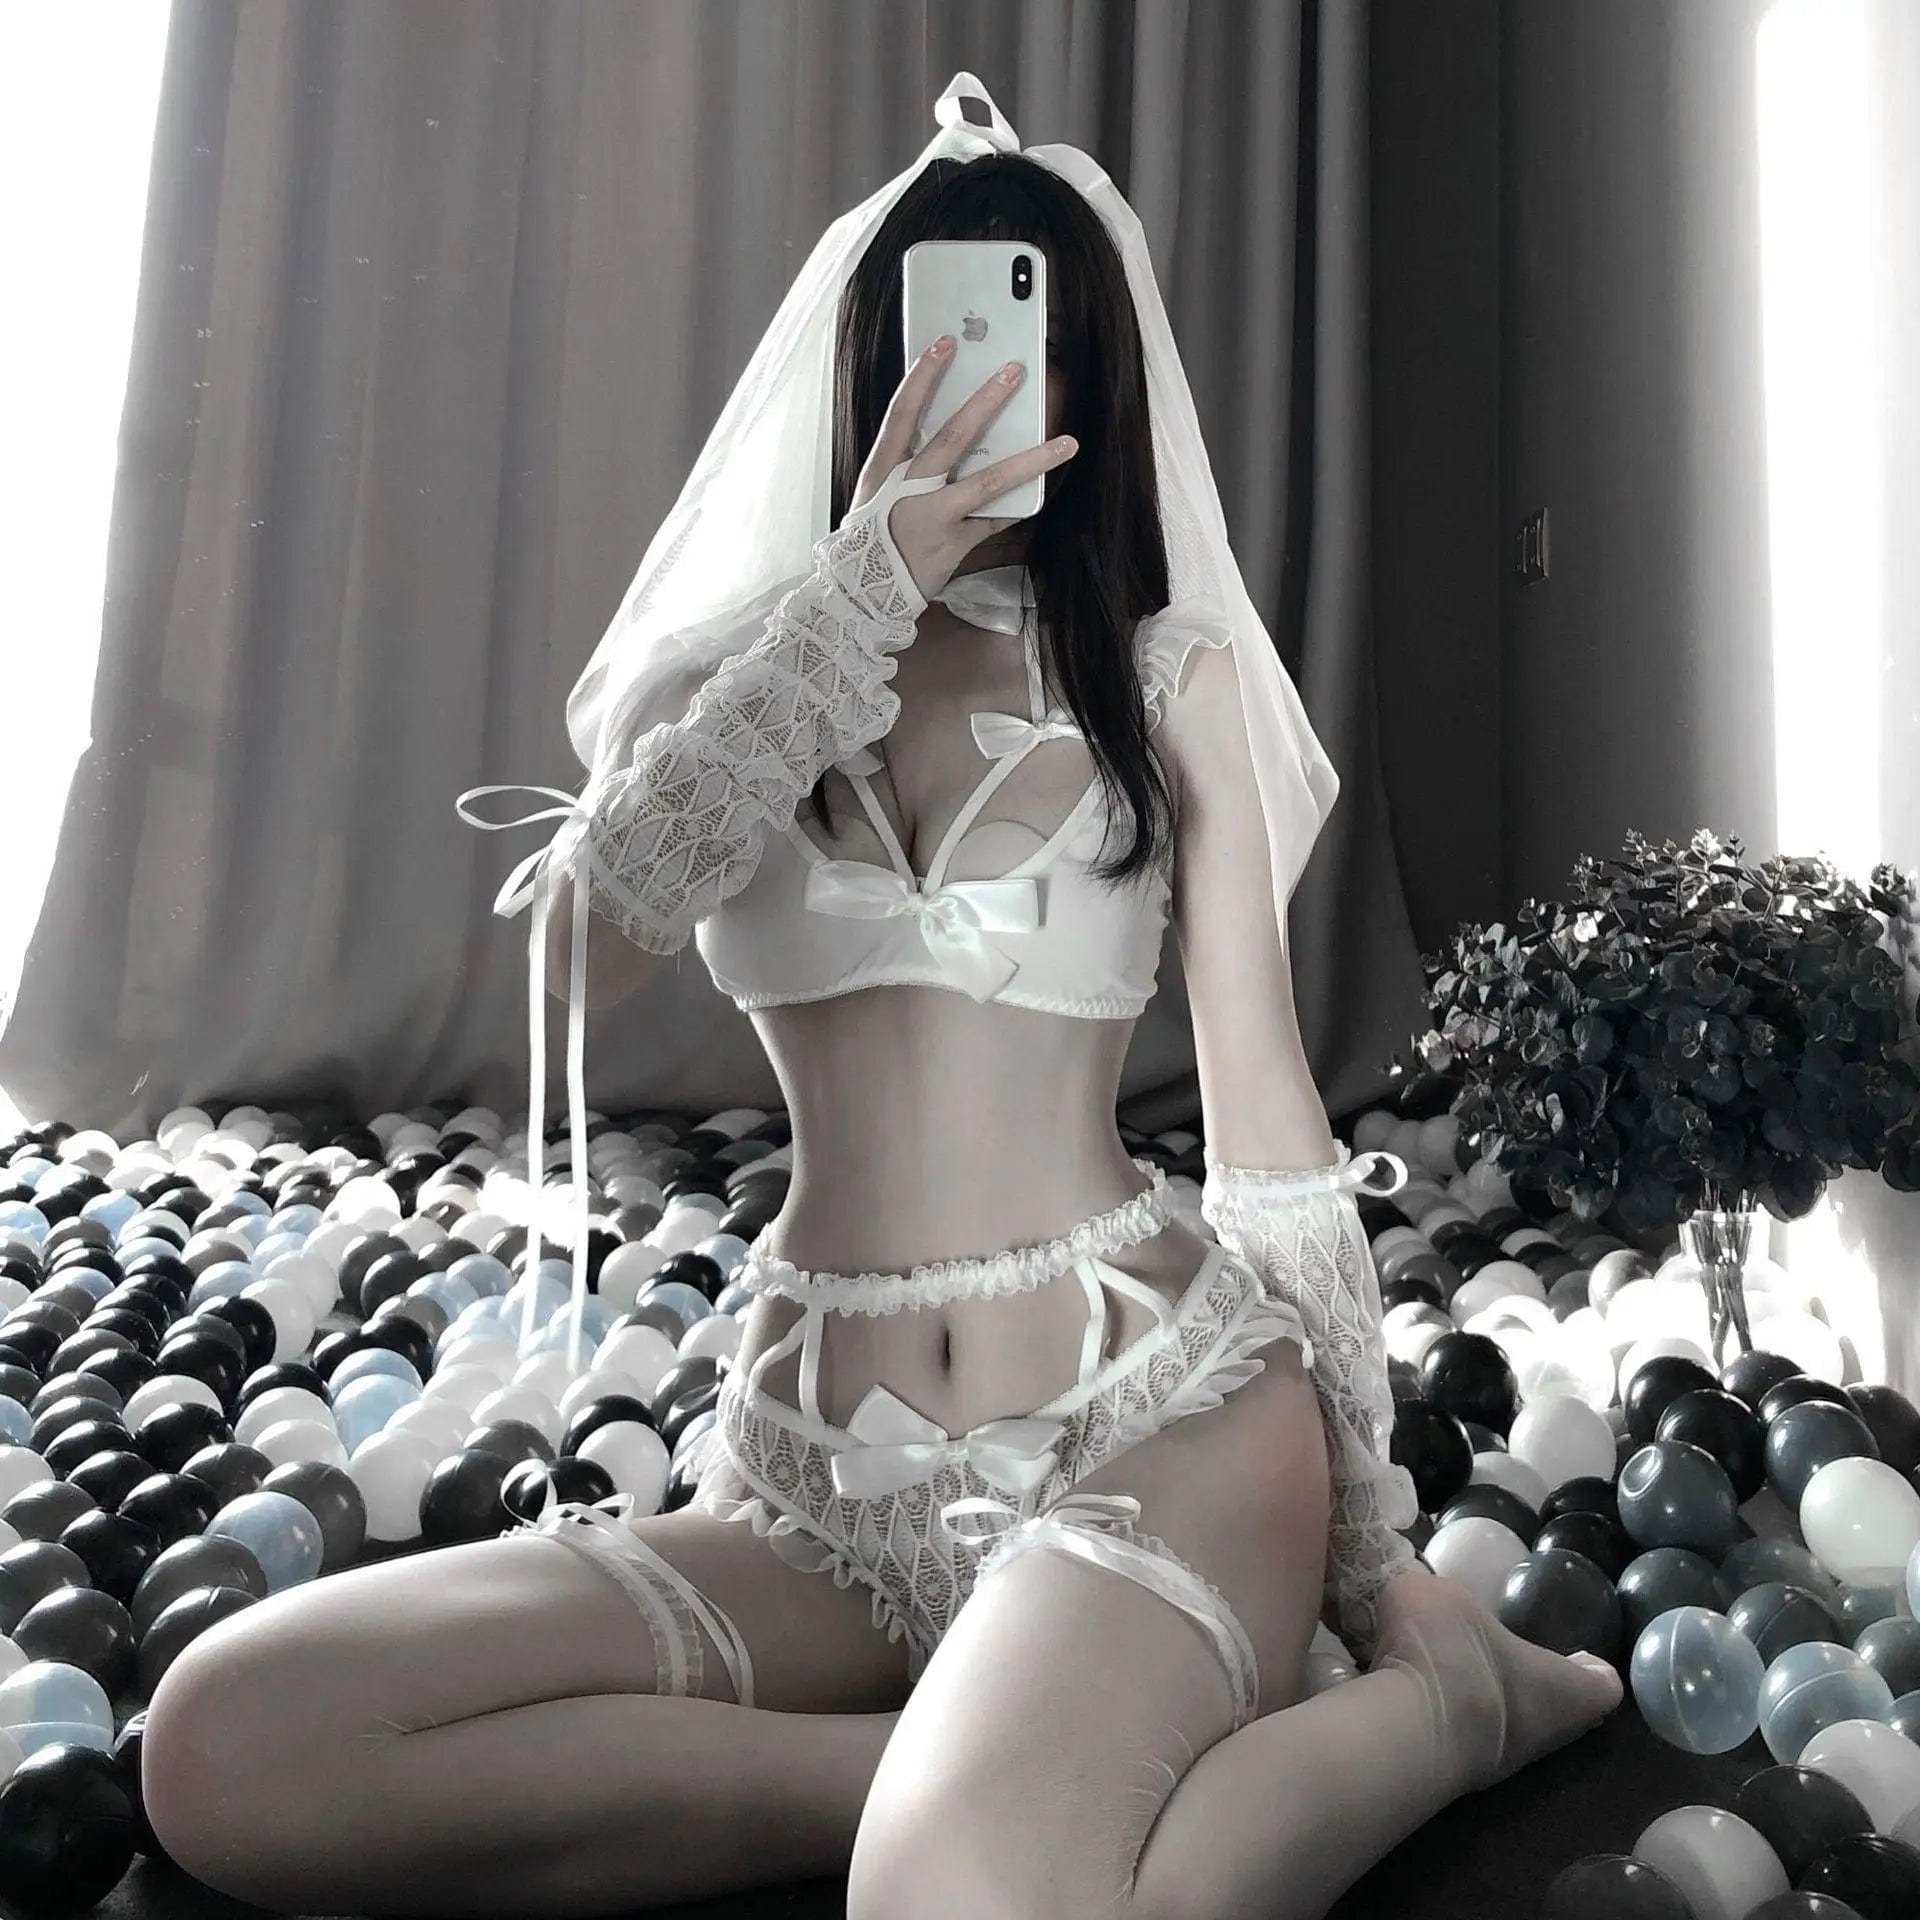 LOVEMI  Erotic lingerie Whitewithsock / One size Lovemi -  New Sexy Lingerie Sexy Three-Point Lace Bridal Dress With